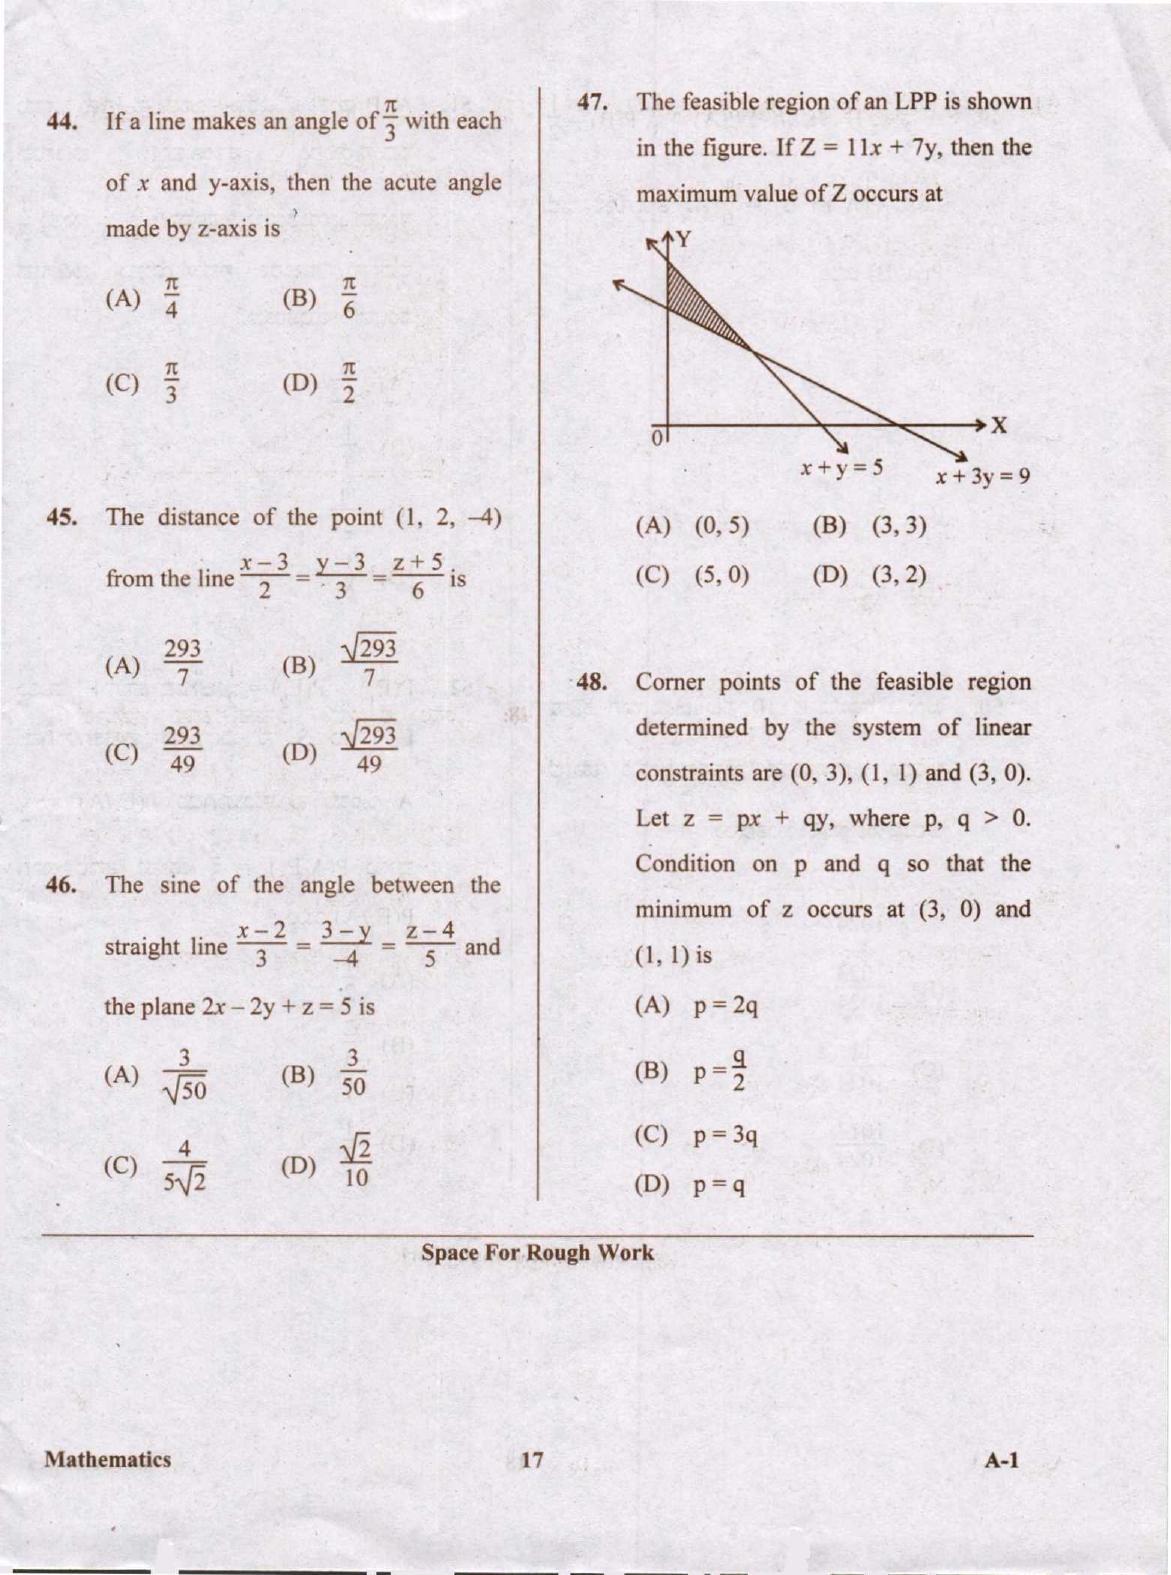 KCET Mathematics 2020 Question Papers - Page 17